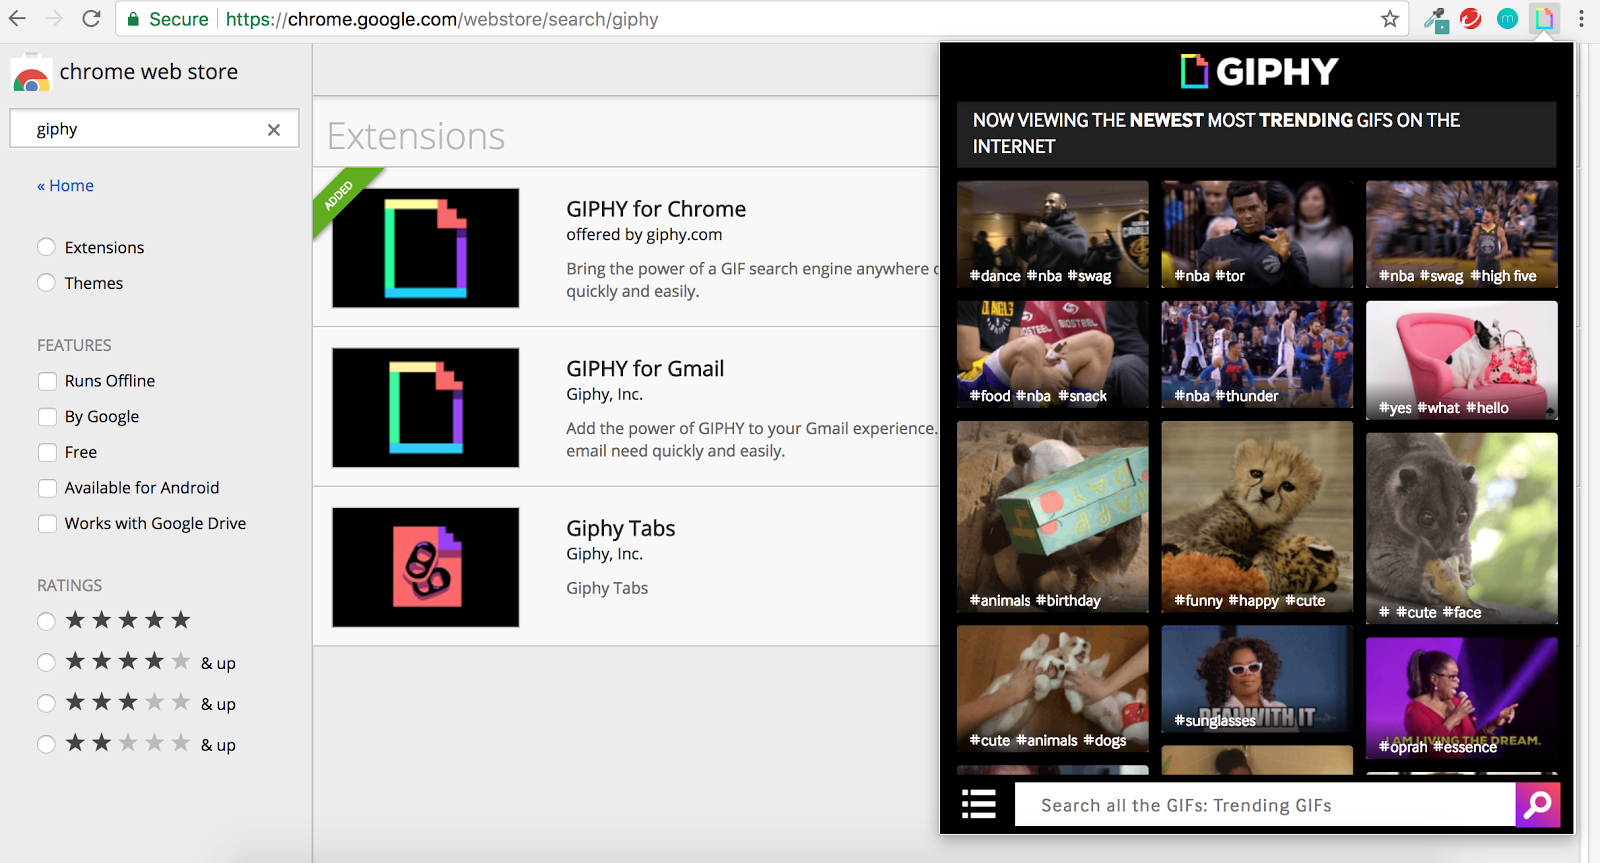 GIPHY Google Chrome Extension